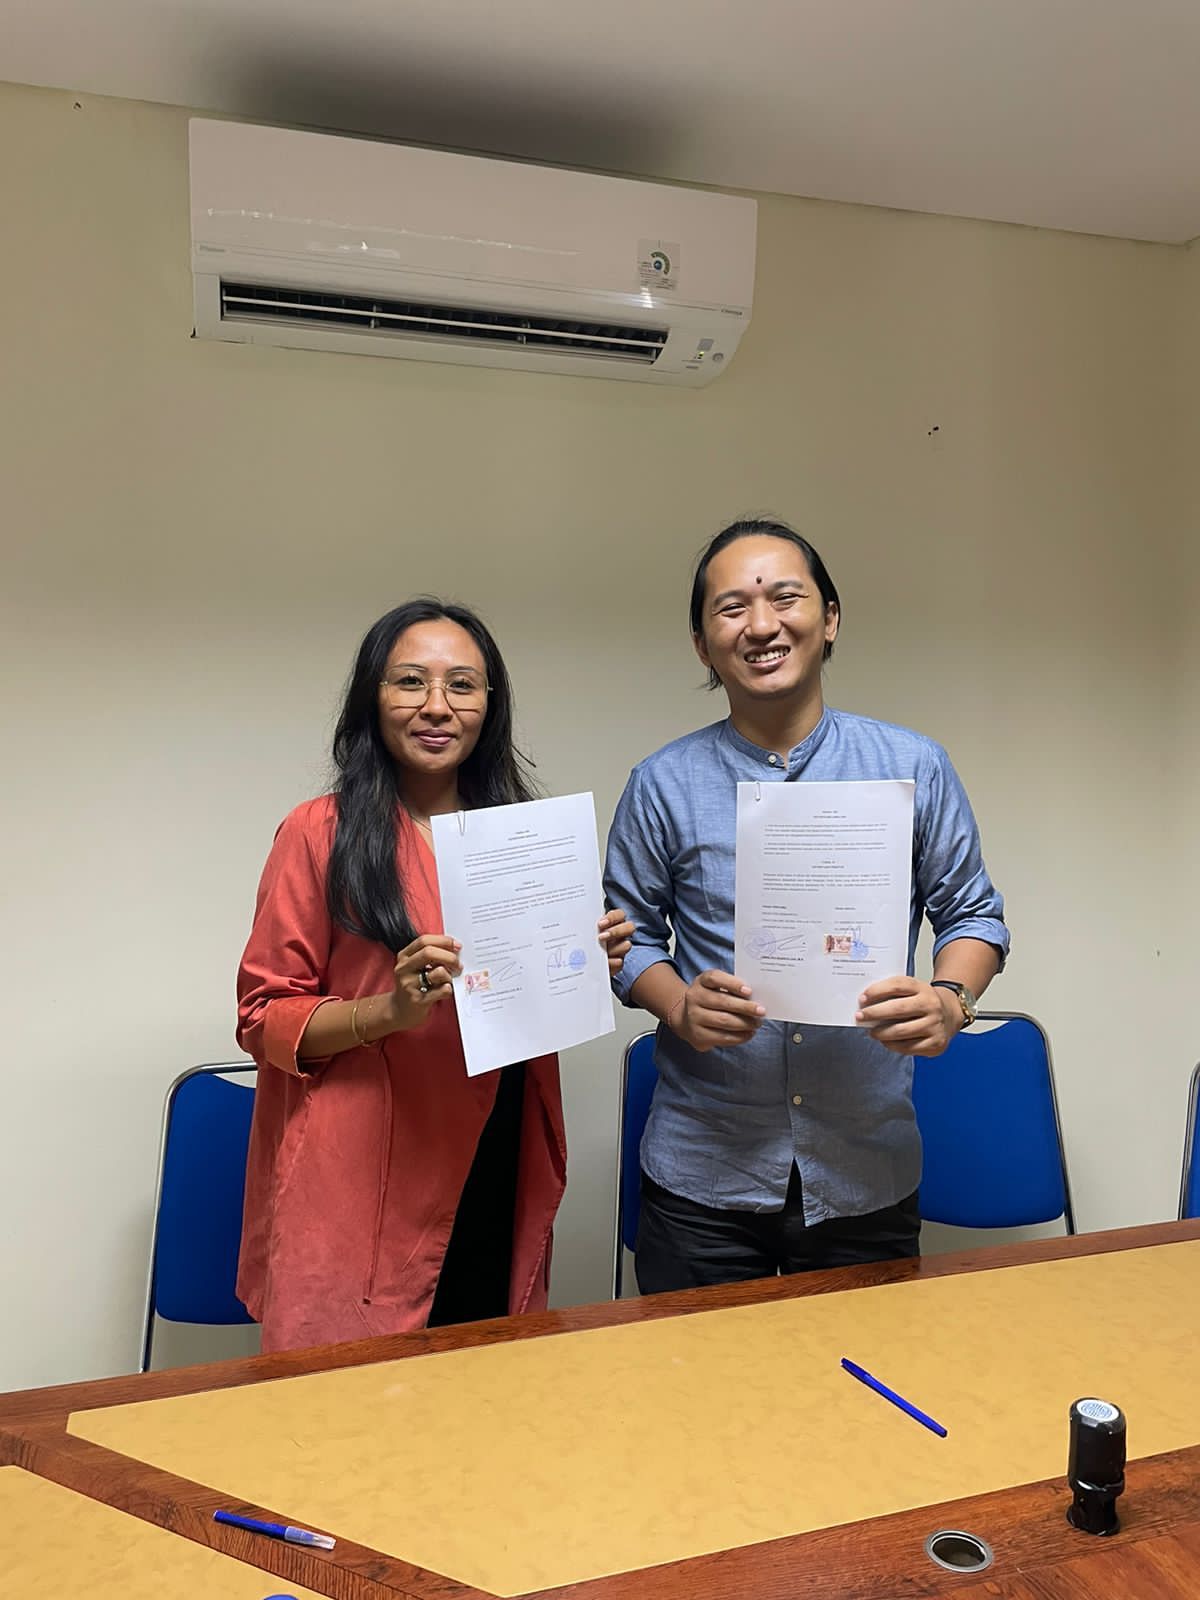 Cooperation of the Udayana University FISIP Communication Studies Program with Silur Barong